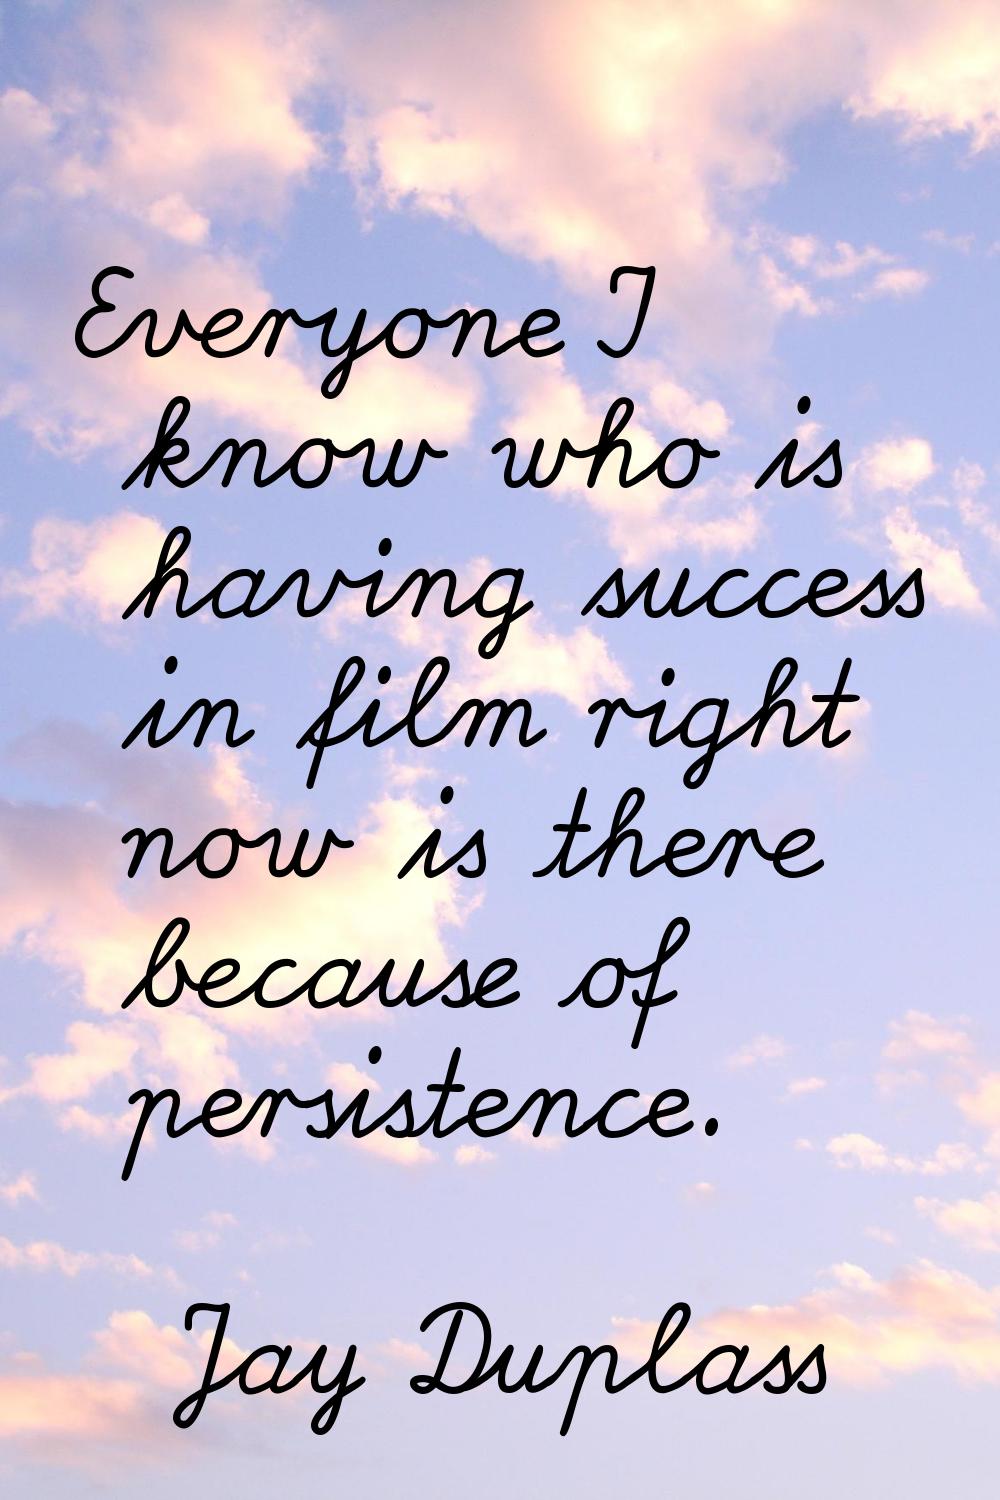 Everyone I know who is having success in film right now is there because of persistence.